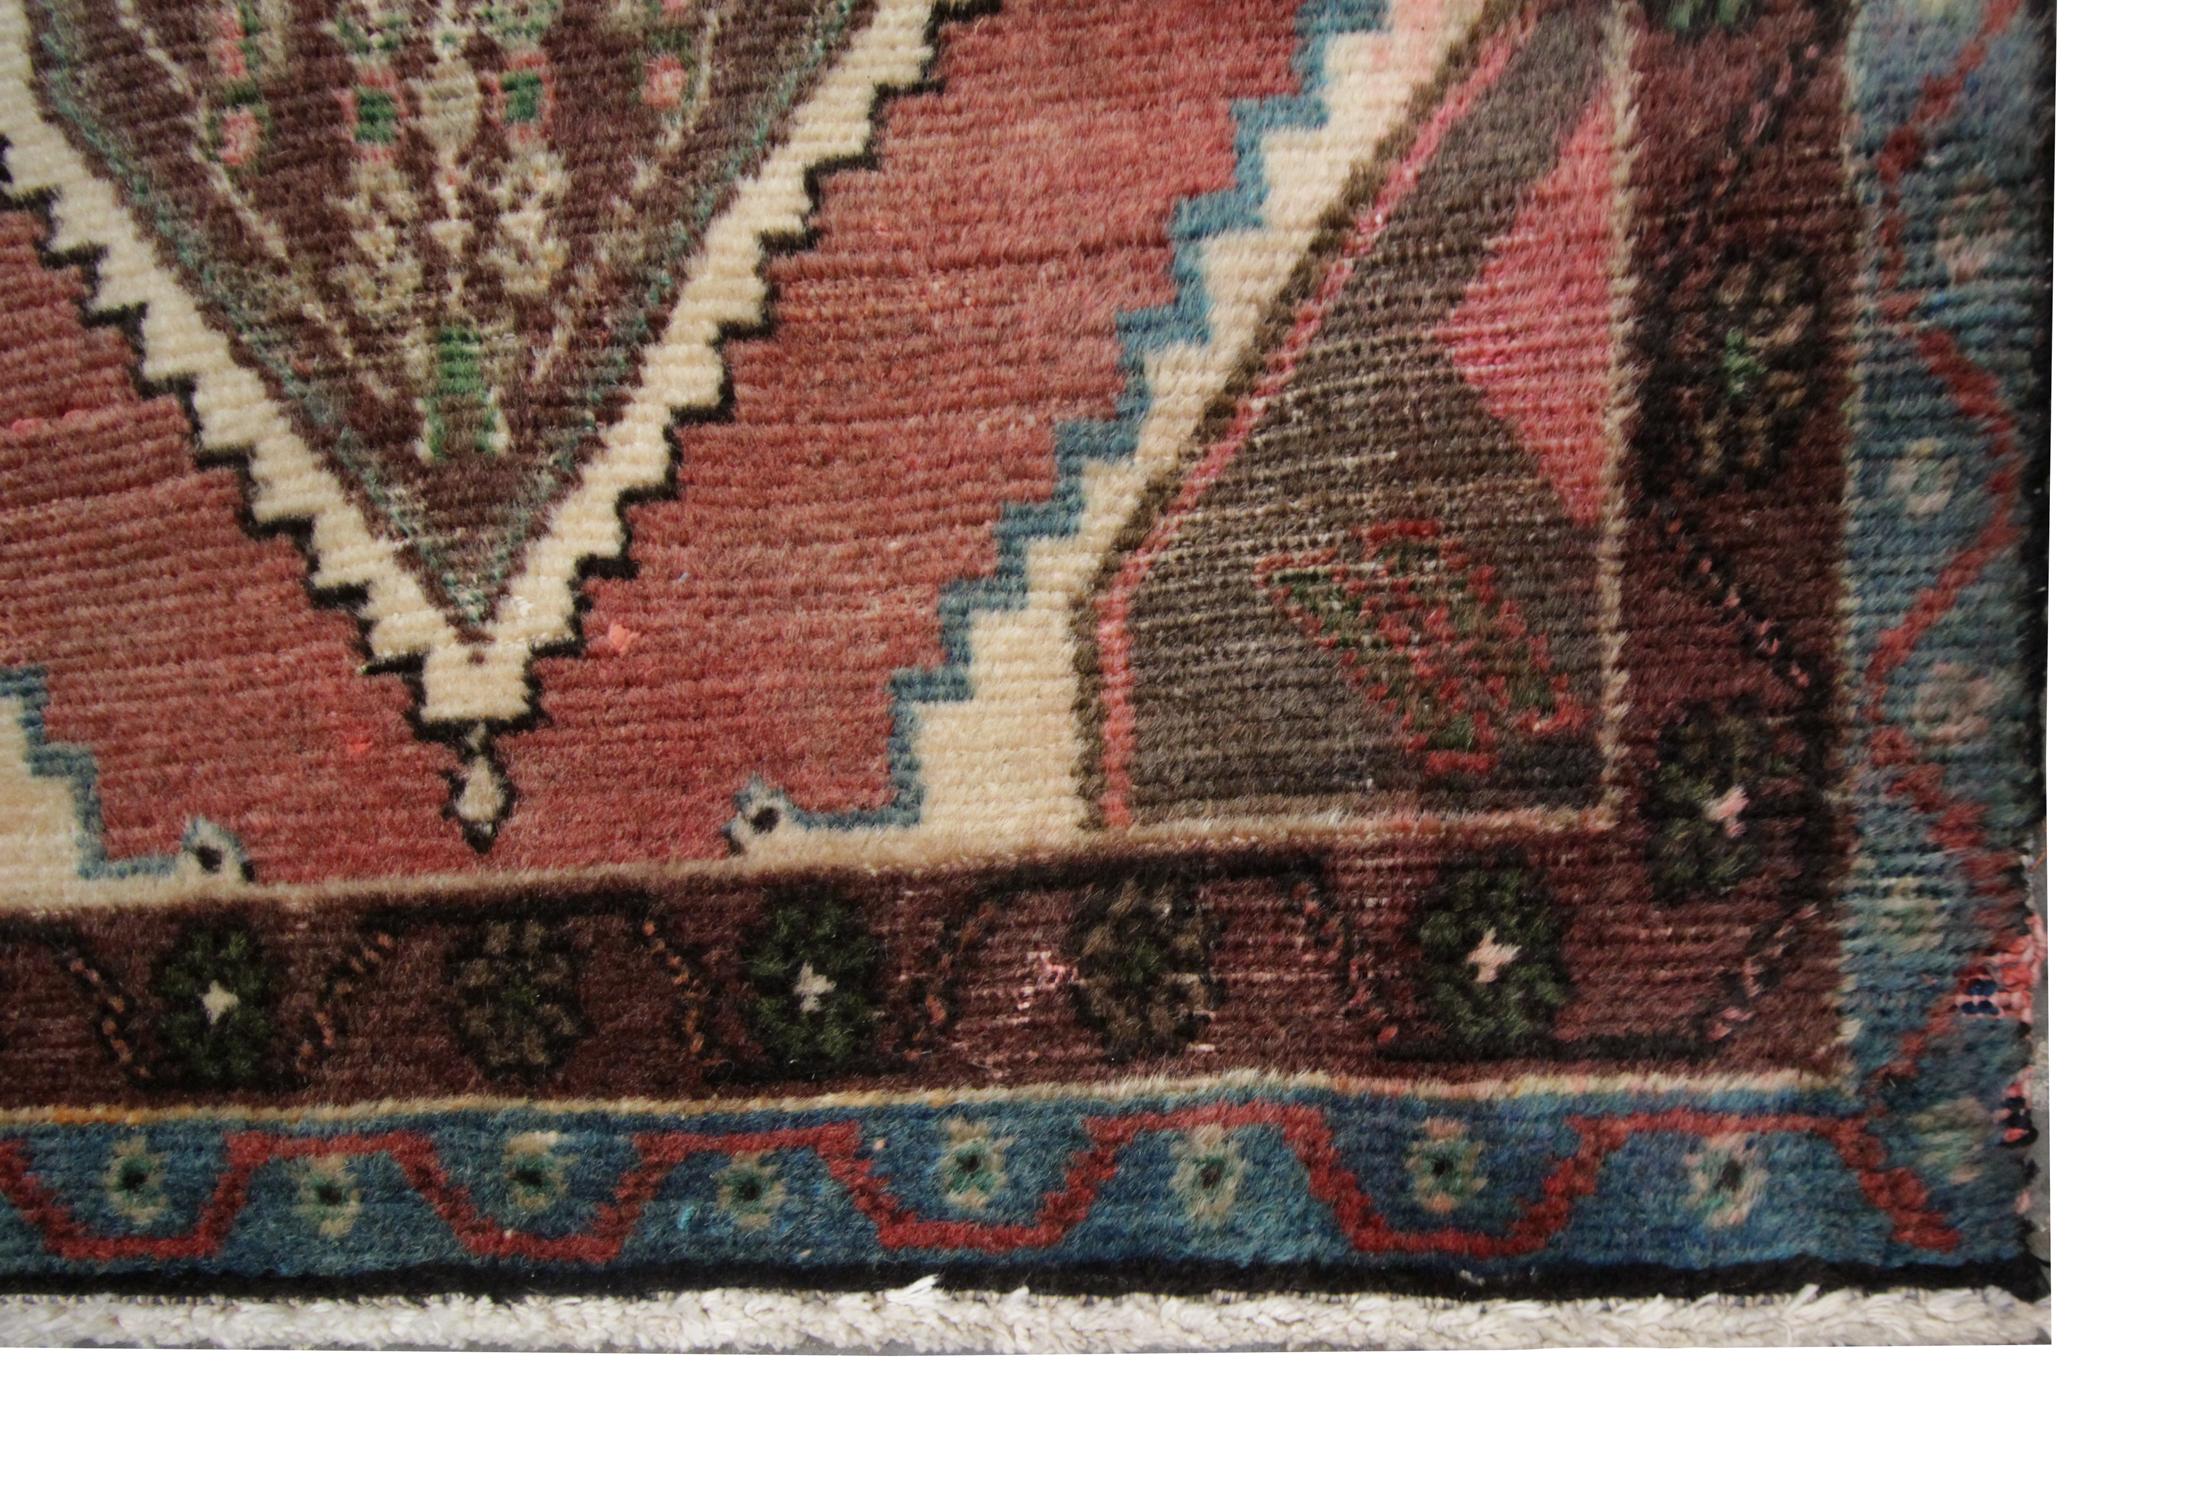 Browns and oranges sit woven in harmony in this geometric handmade carpet runner rug, featuring a repeat pattern of brown, detailed diamonds which sit on a background of red in this oriental rug. Further details show geometric motifs and zigzag